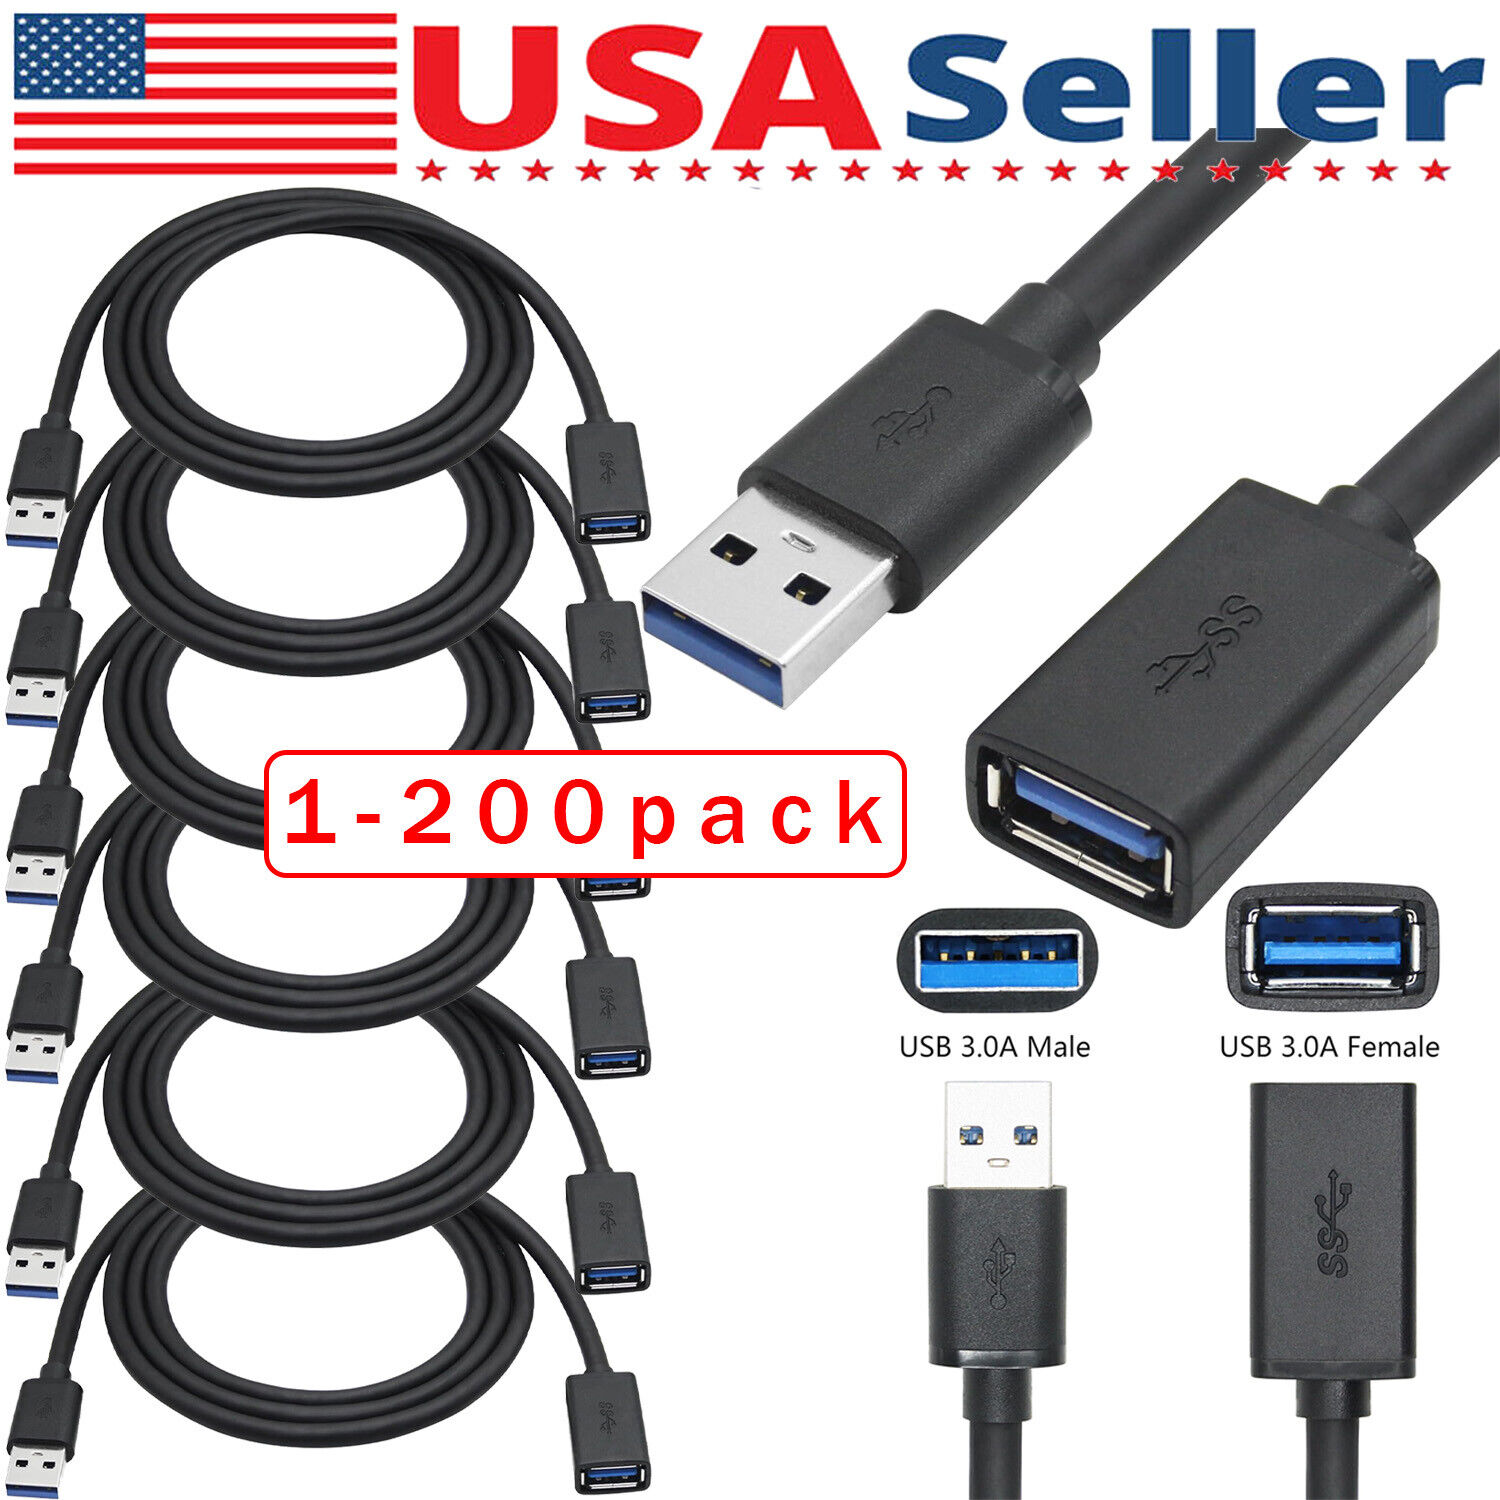 USB3.0 Extension Cable High Speed Extender Cord Adapter TypeA Male to Female Lot